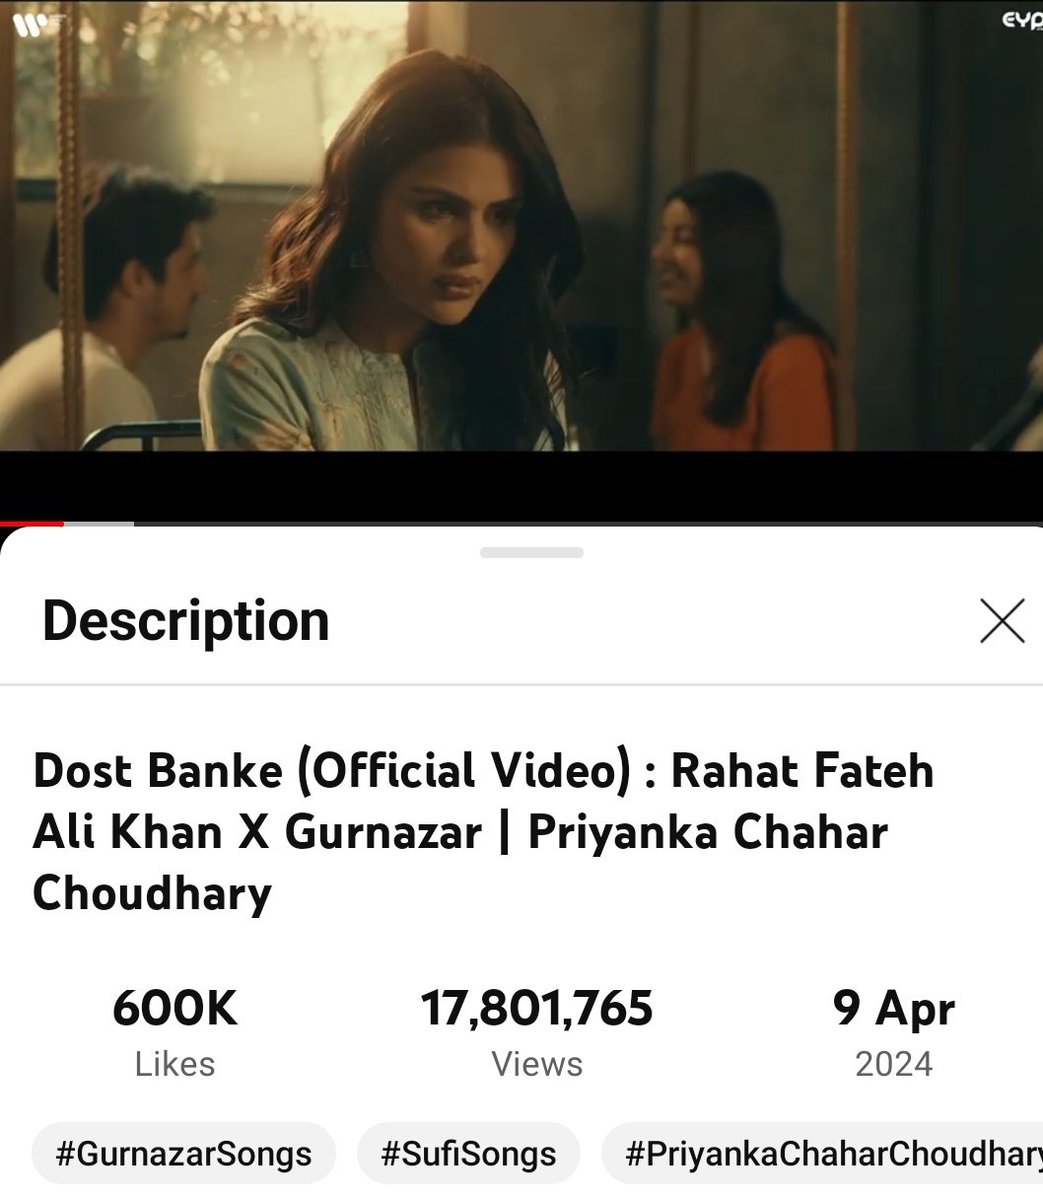 17.8M+views completed with whopping 600K Likes...🔥
Keep posting reels and edits on SM to hype the song #DostBanke. 
#PriyankaChaharChoudhary #PriyankaPaltan